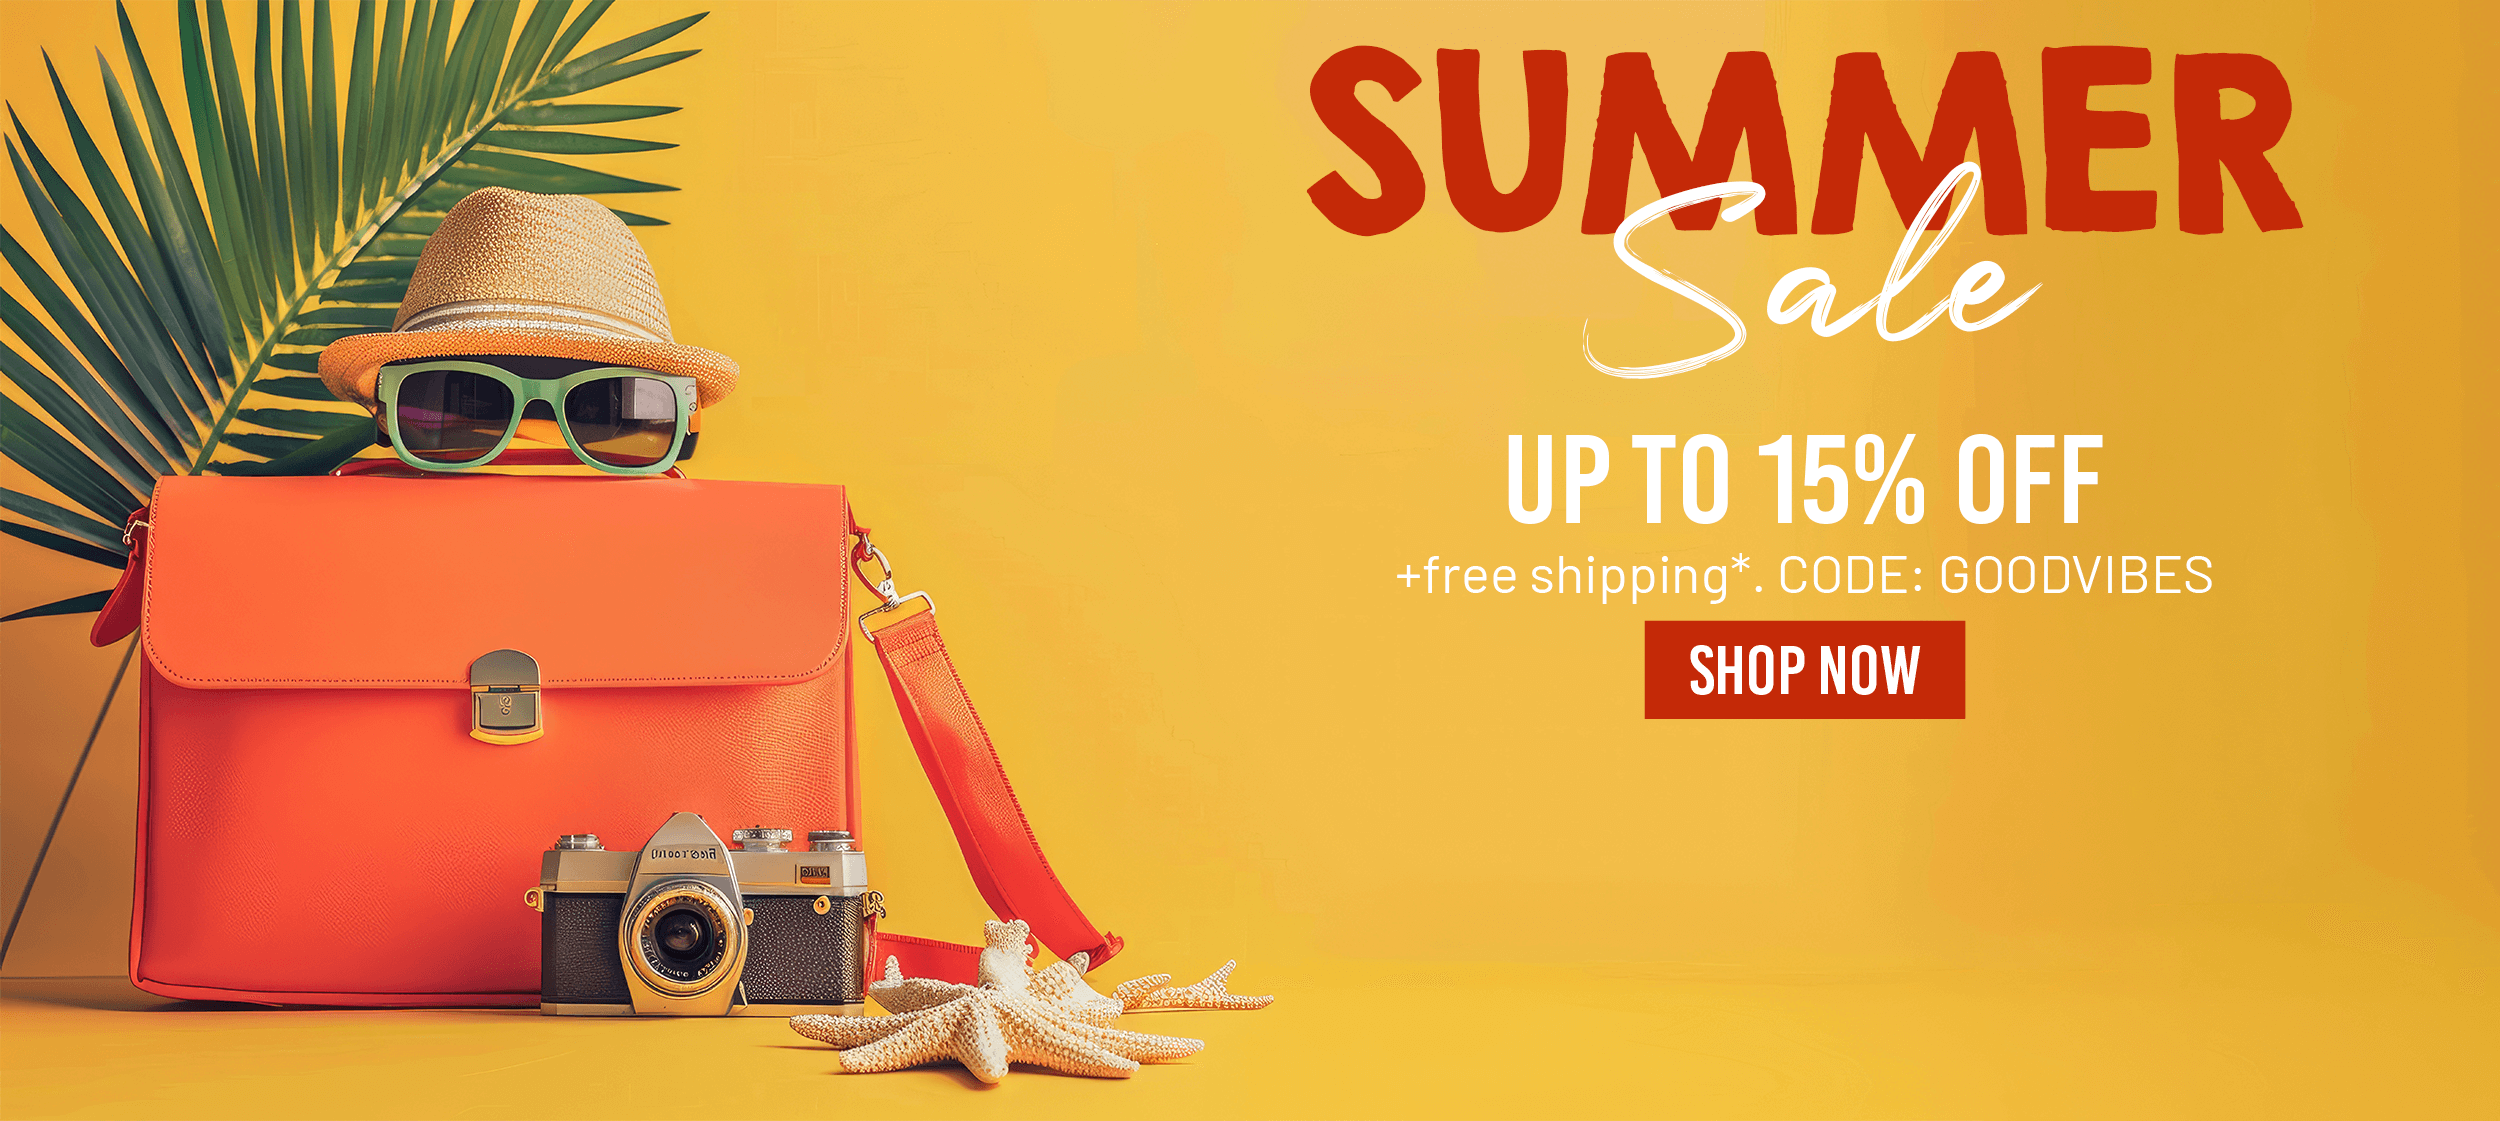 SUMMER SALE NOW. 15% OFF! + Free Shipping*